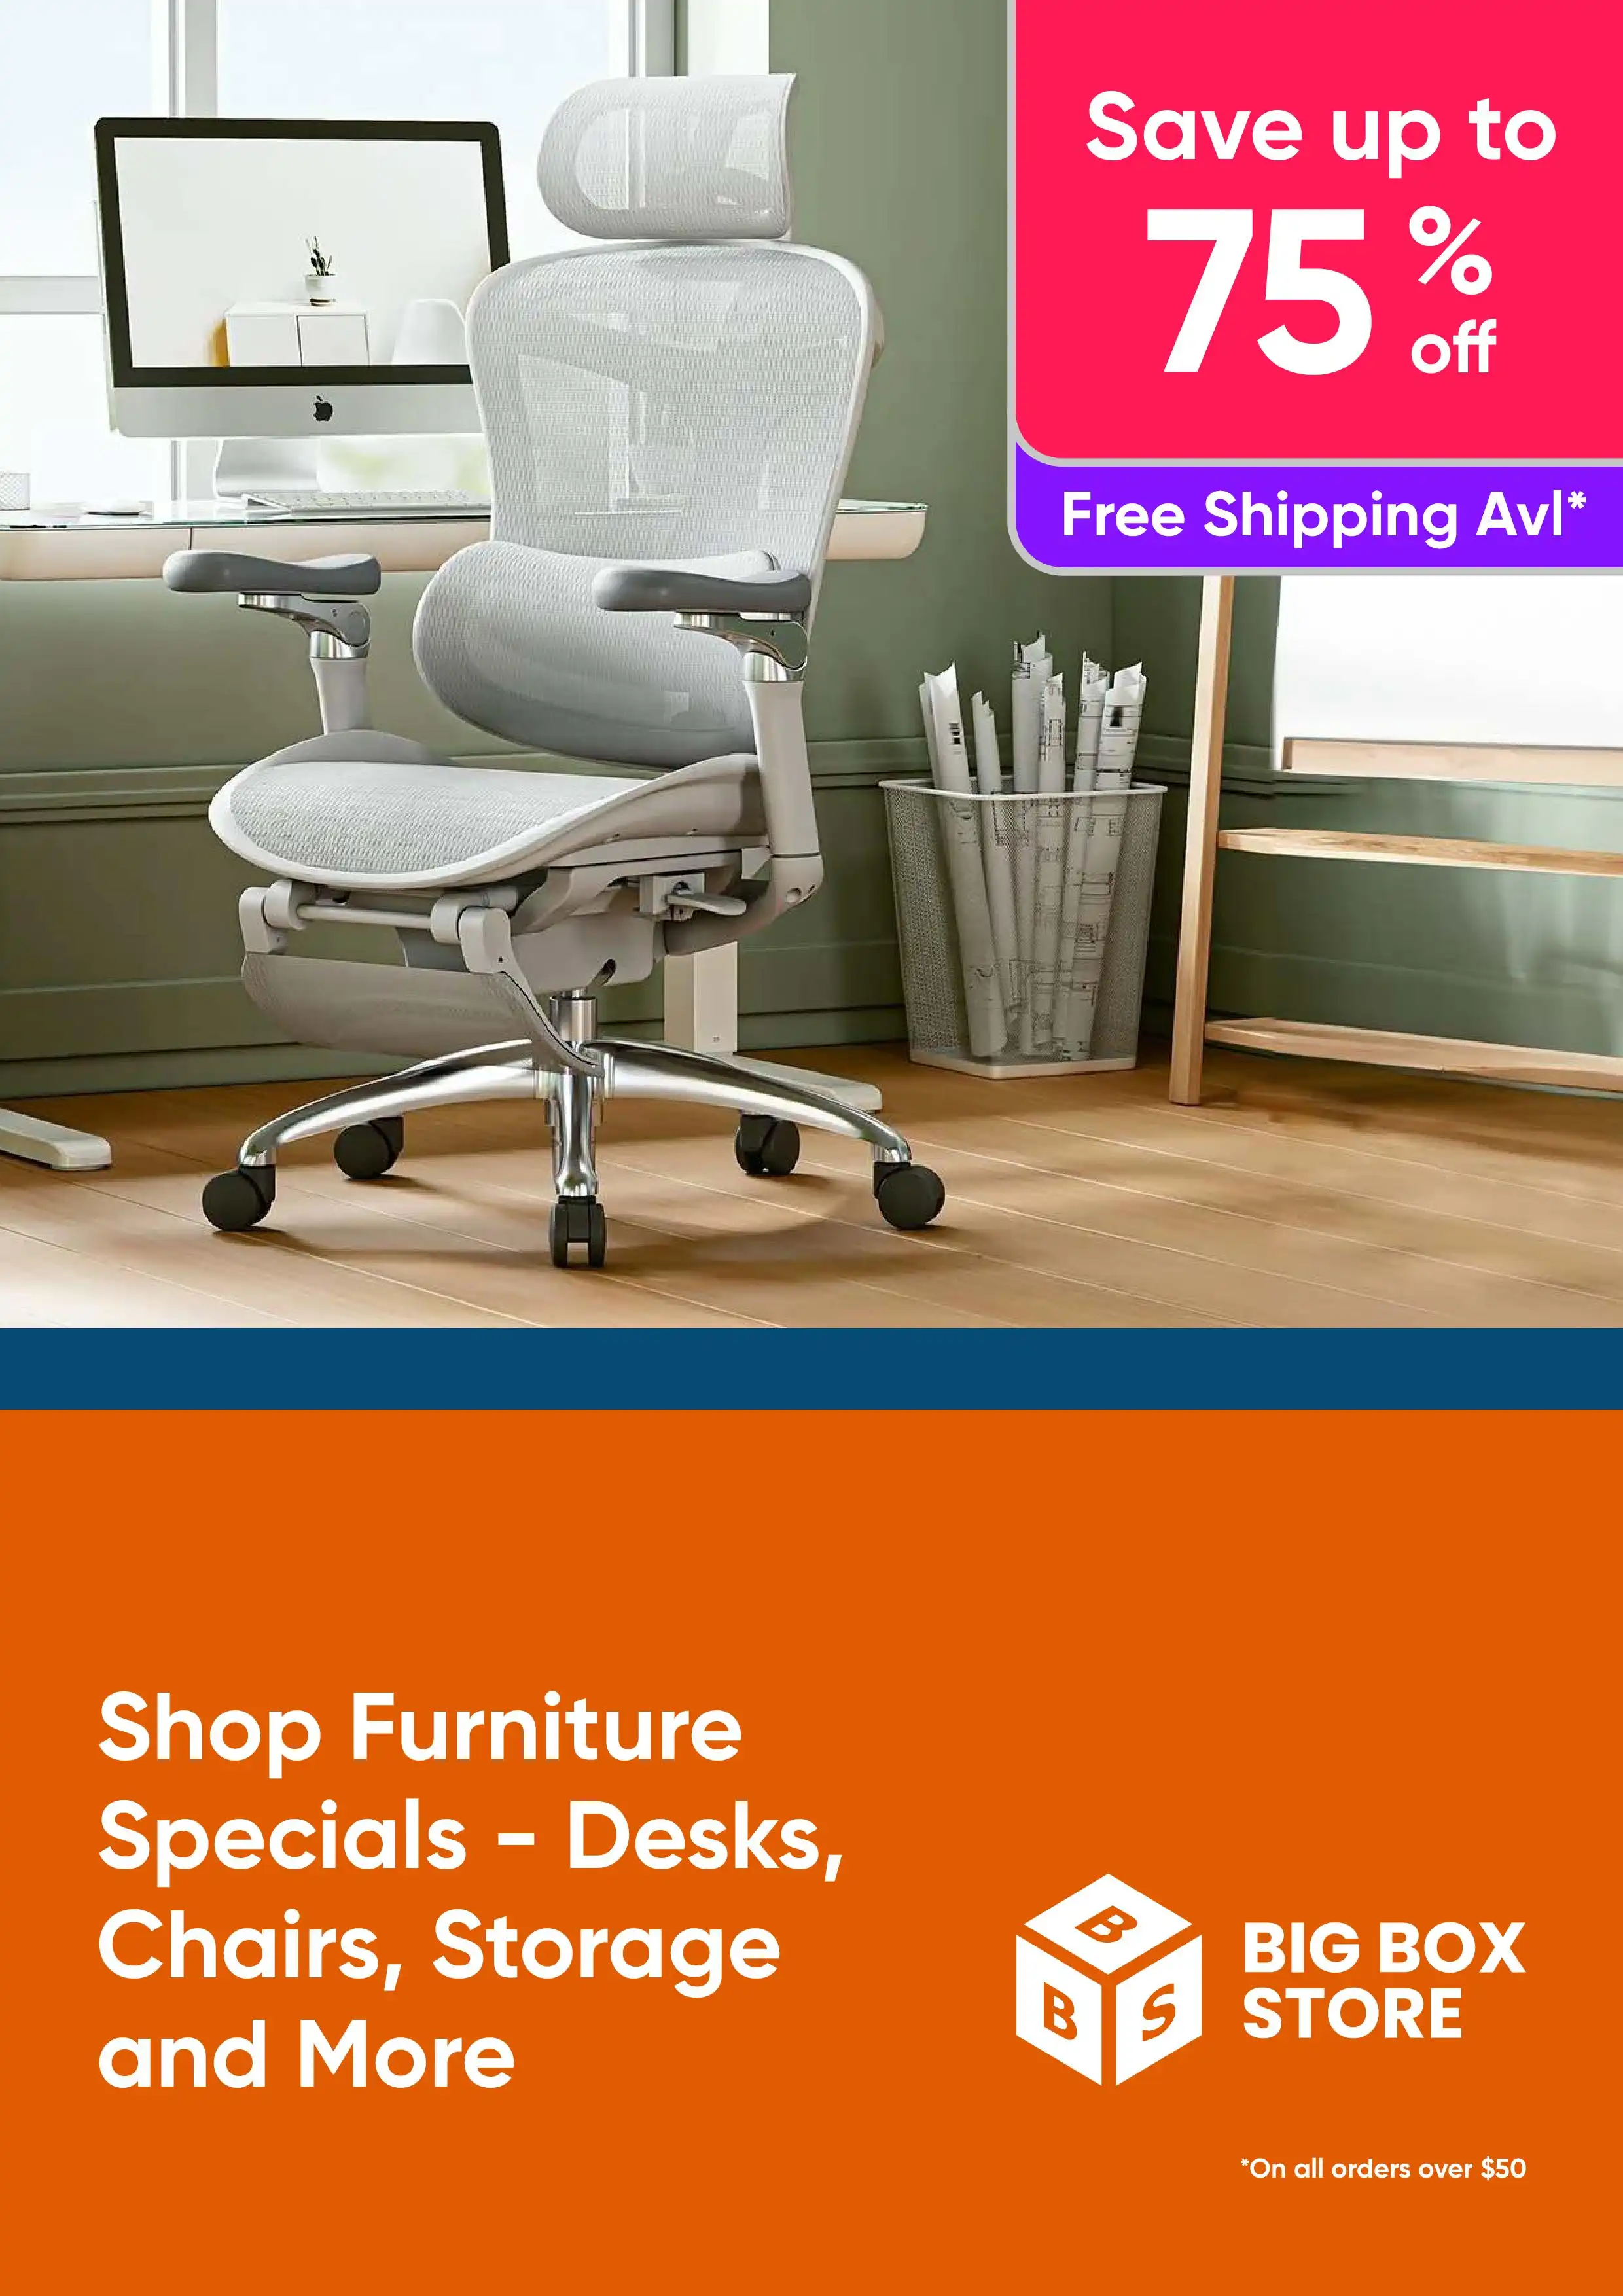 Shop Furniture Specials - Save Up to 75% Off a Range of Desks, Chairs, Storage